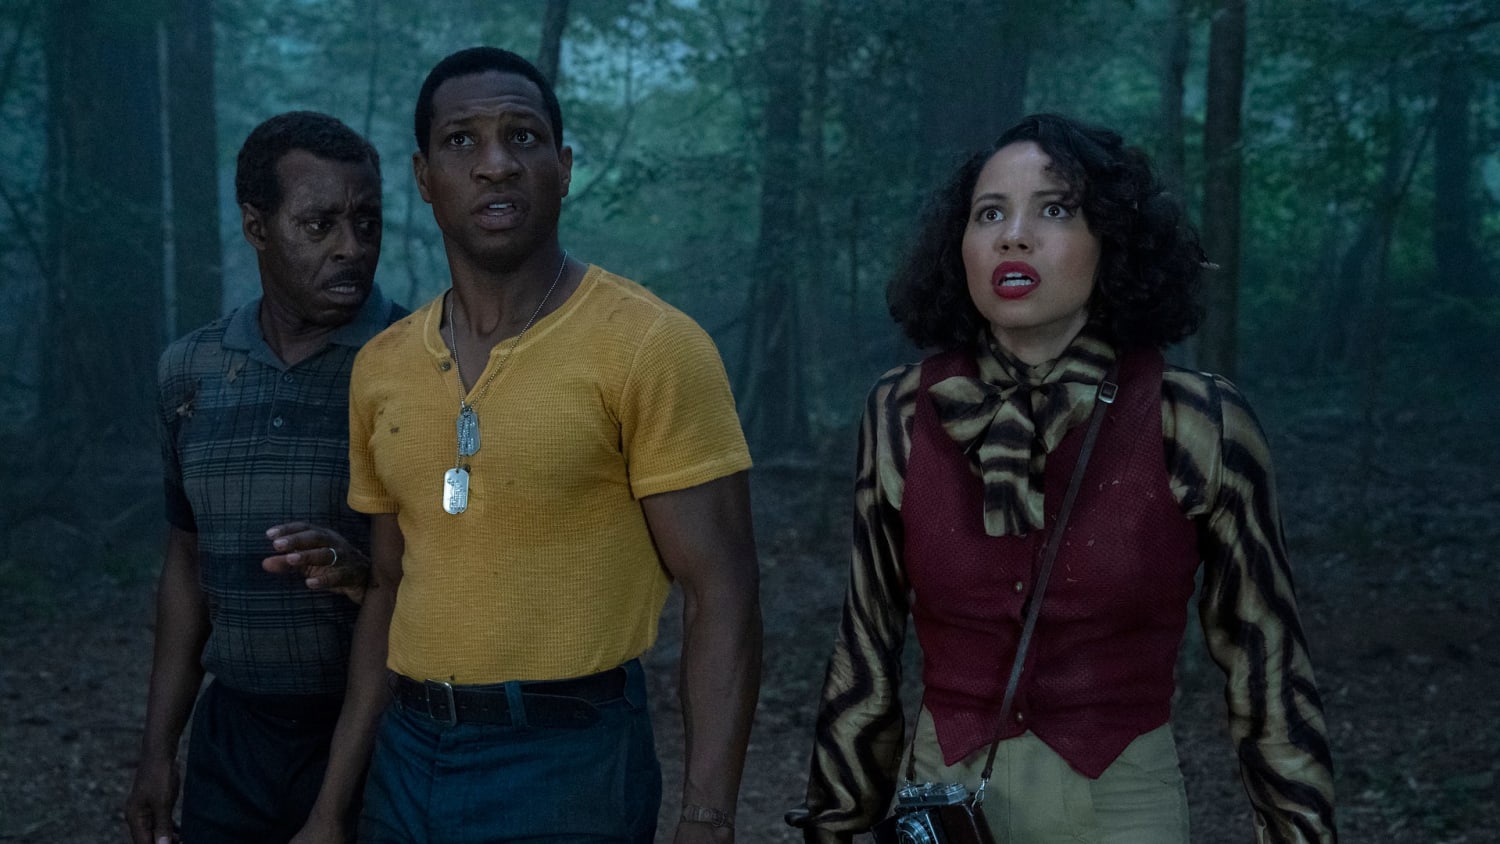 'Lovecraft Country' review: In HBO's horror series, America's racism is the real monster